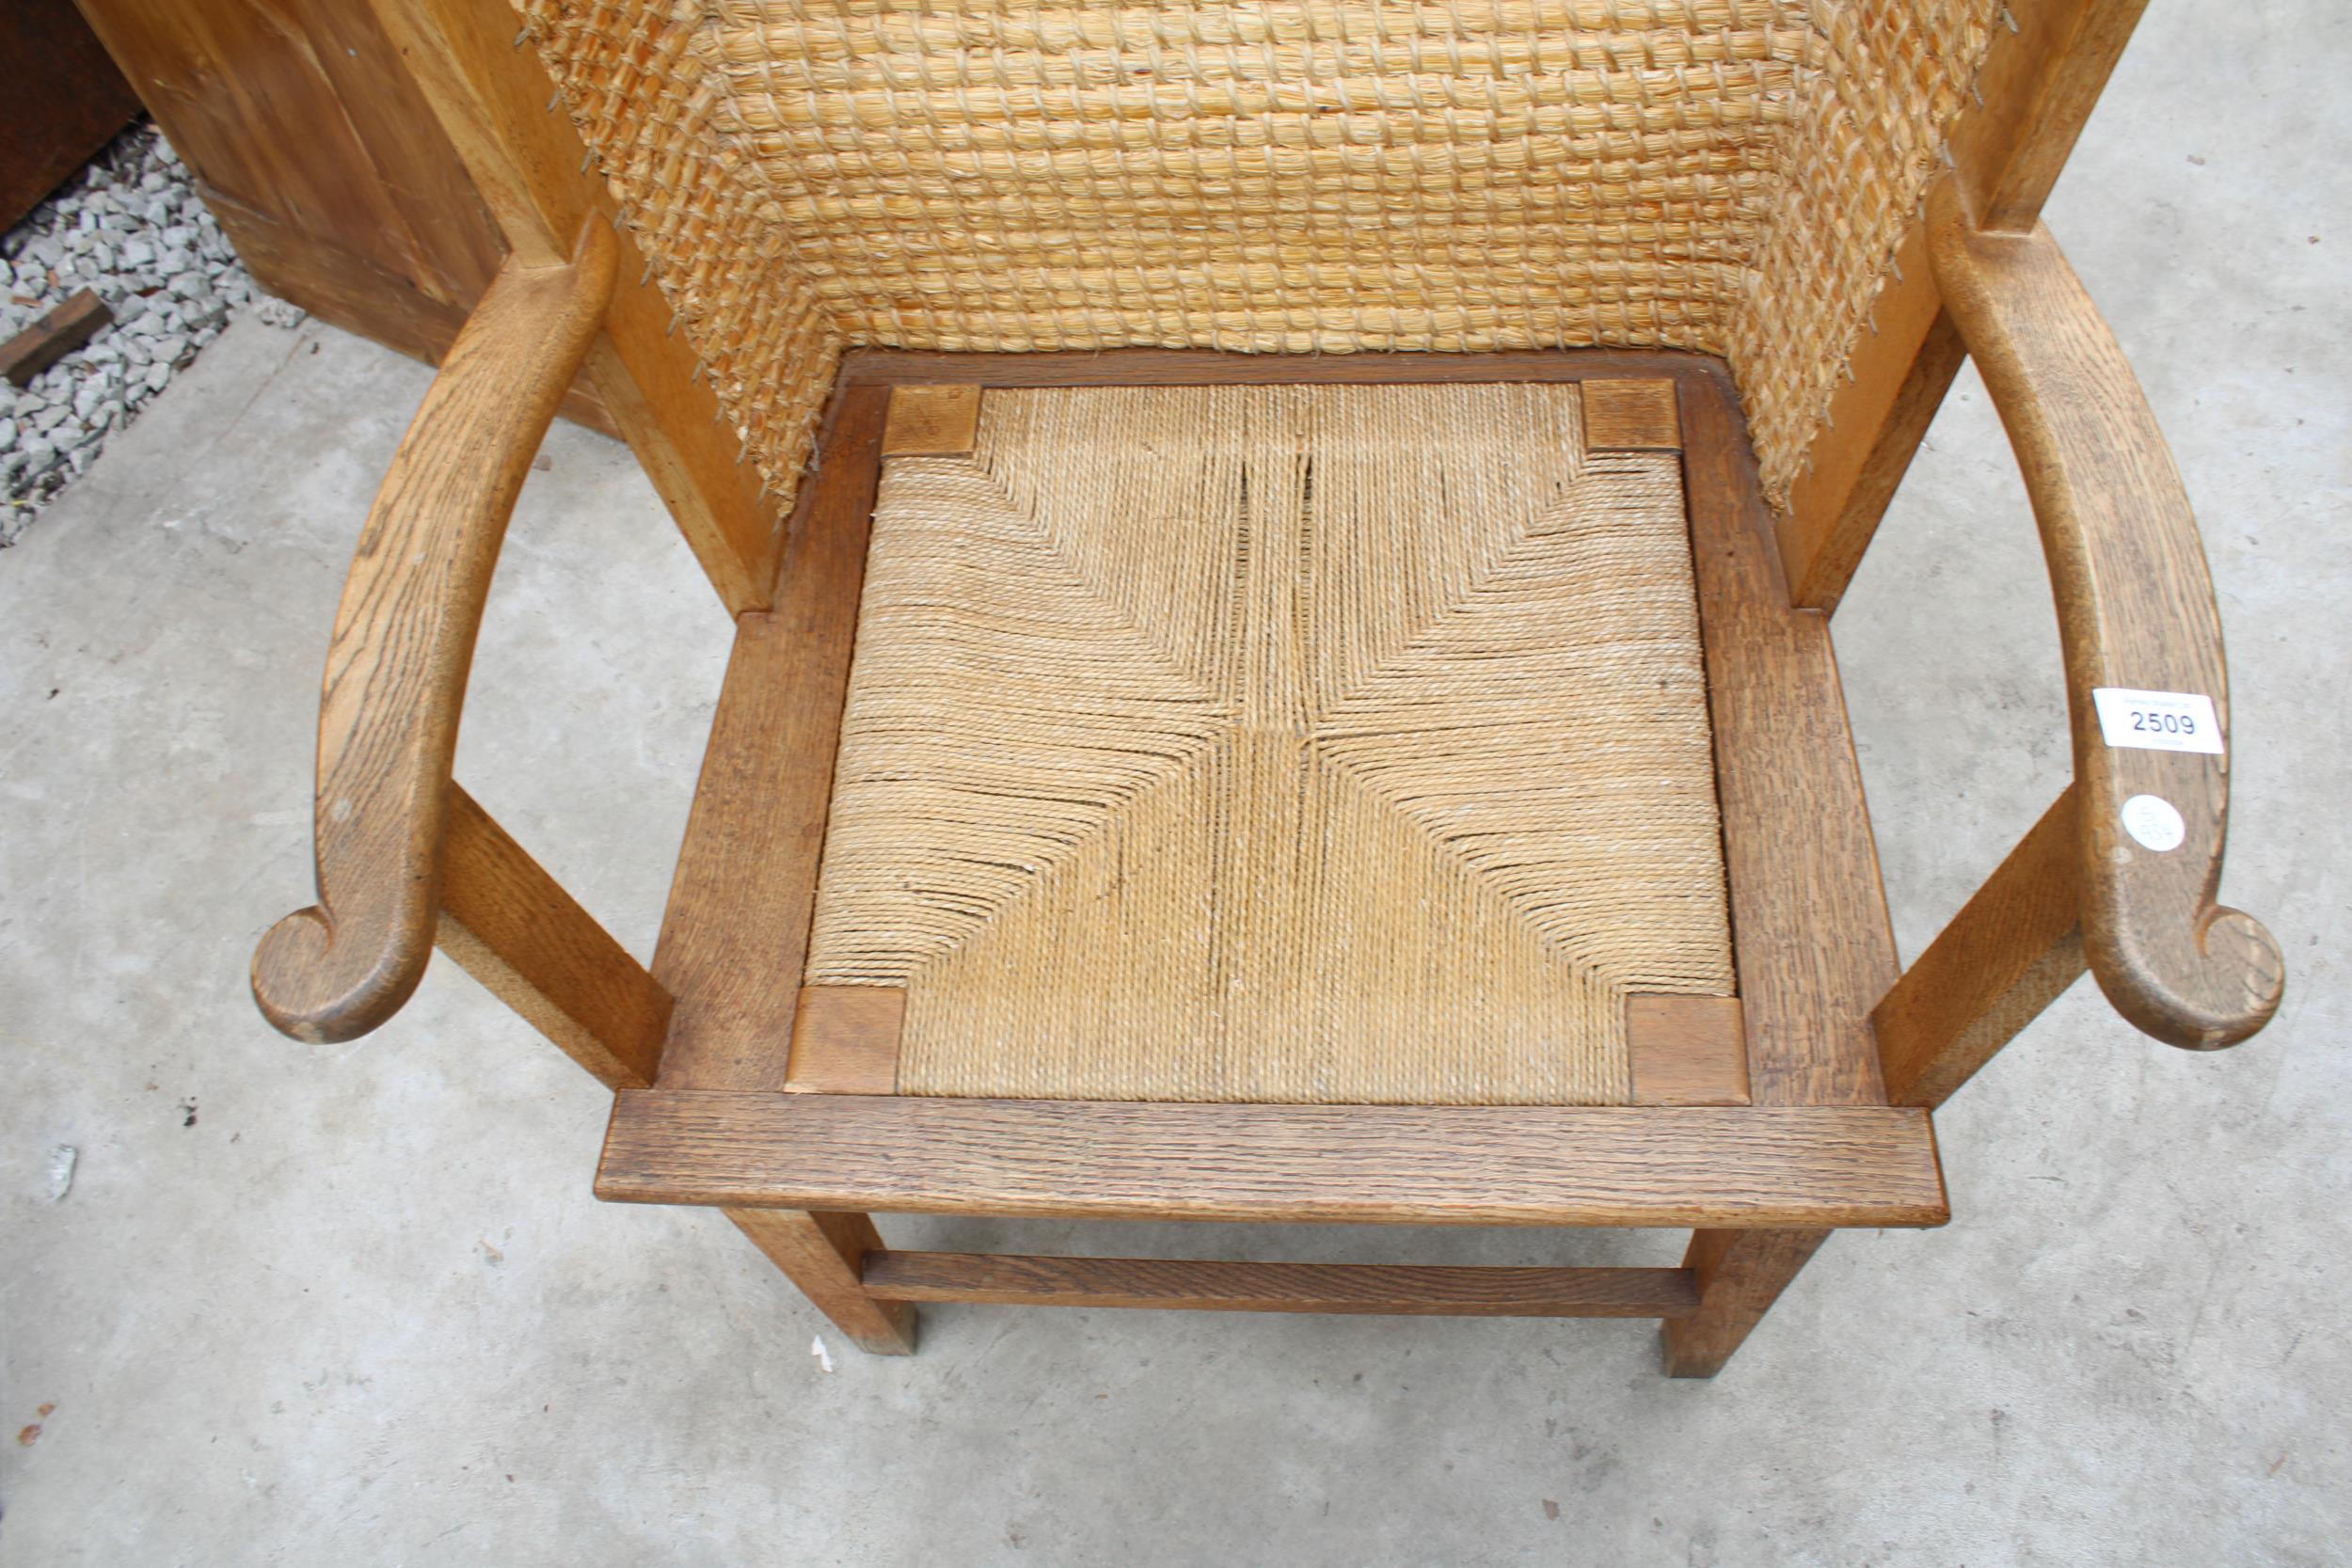 A HOODED OAK FRAMED ORKNEY CHAIR WITH WICKER SEAT AND STITCHED STRAW BACK, STAMPED D M KIRKNESS, - Image 4 of 4